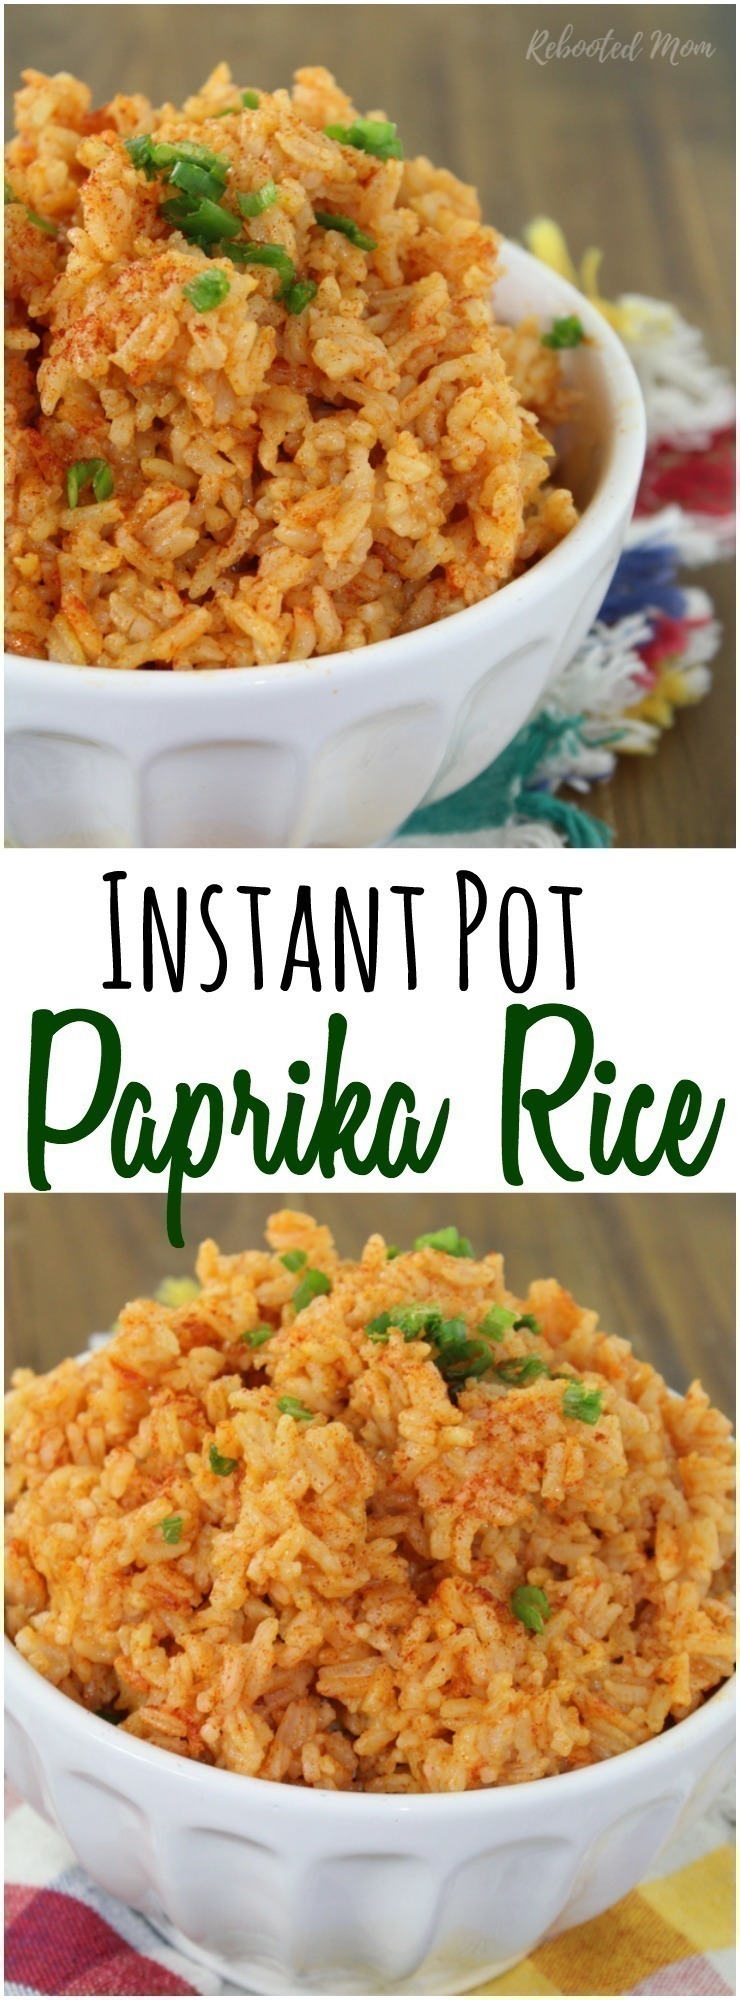 Paprika provides a pop of color & subtle flavor to the basic white rice - in the ease of your Instant Pot!